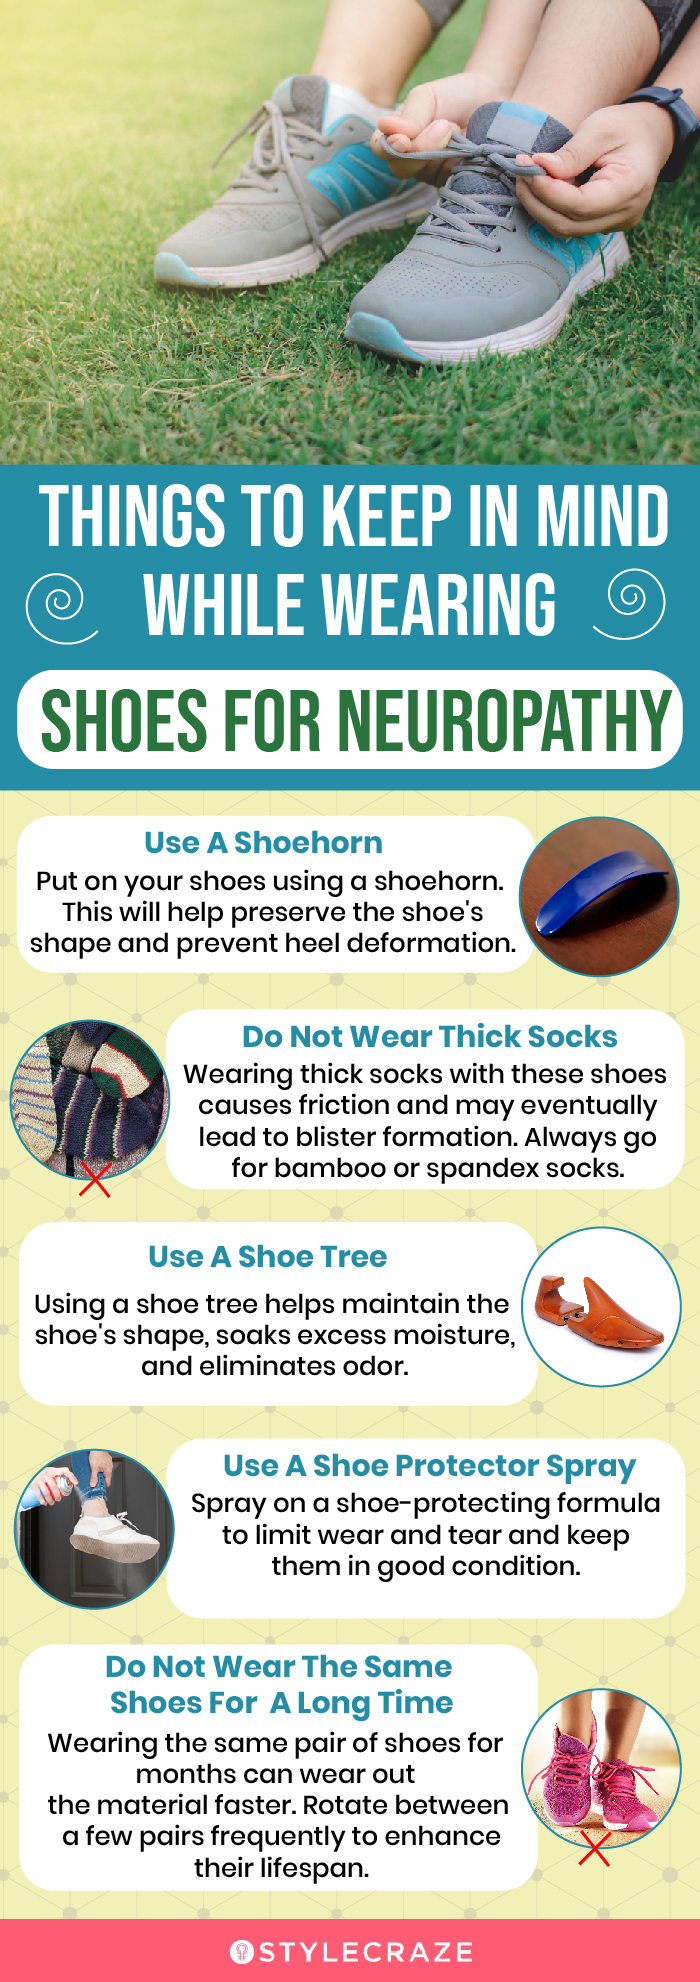 Things To Keep In Mind While Wearing Shoes For Neuropathy (infographic)